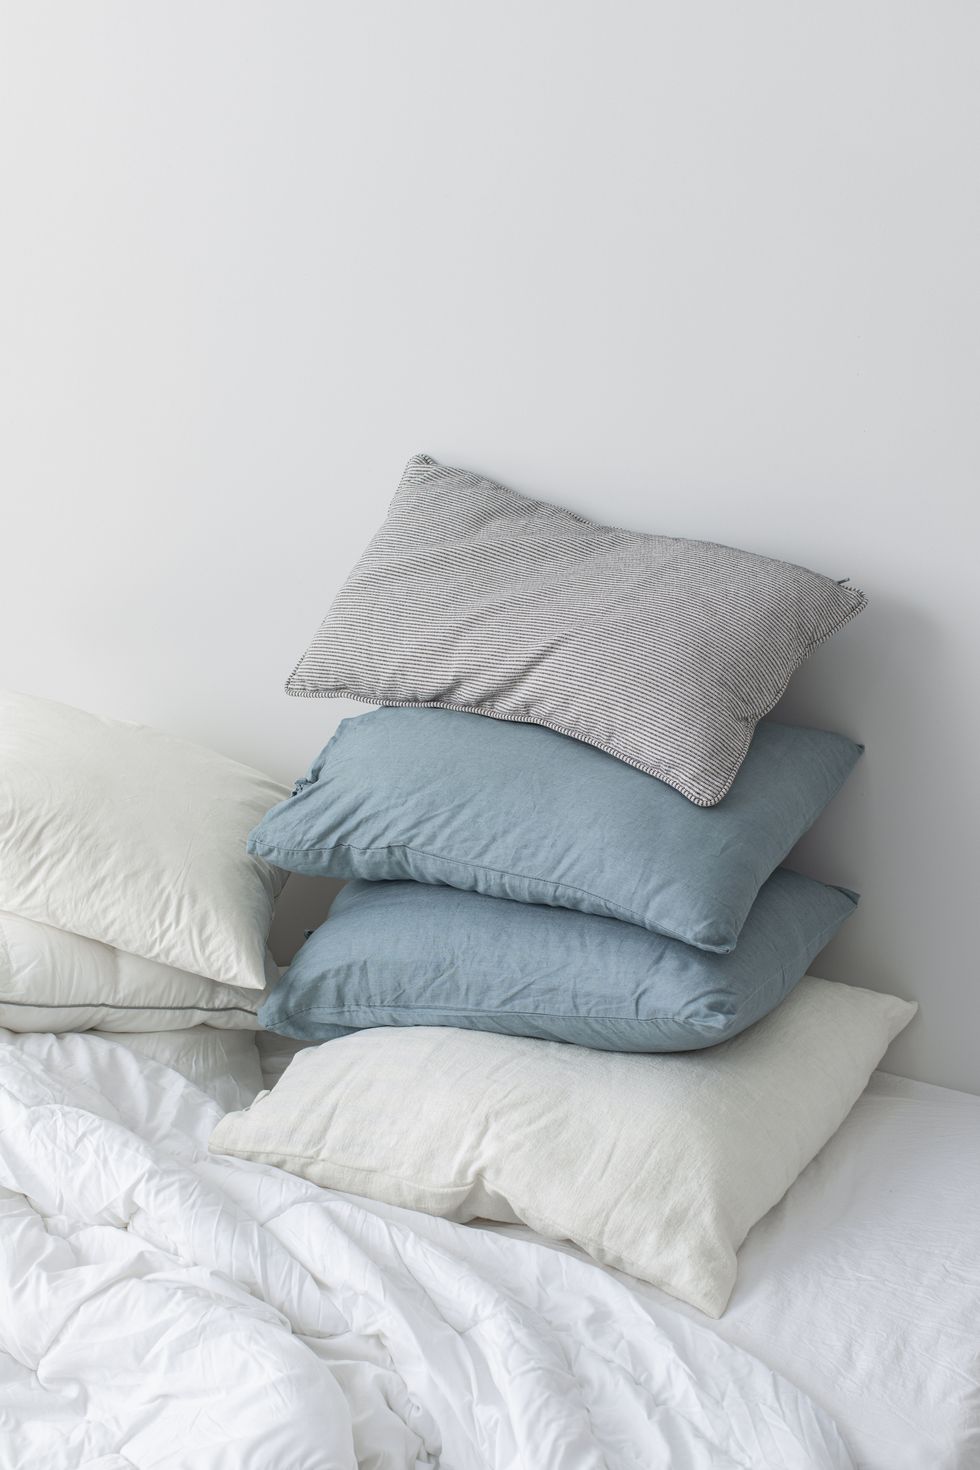 pile of soft pillows on a bed